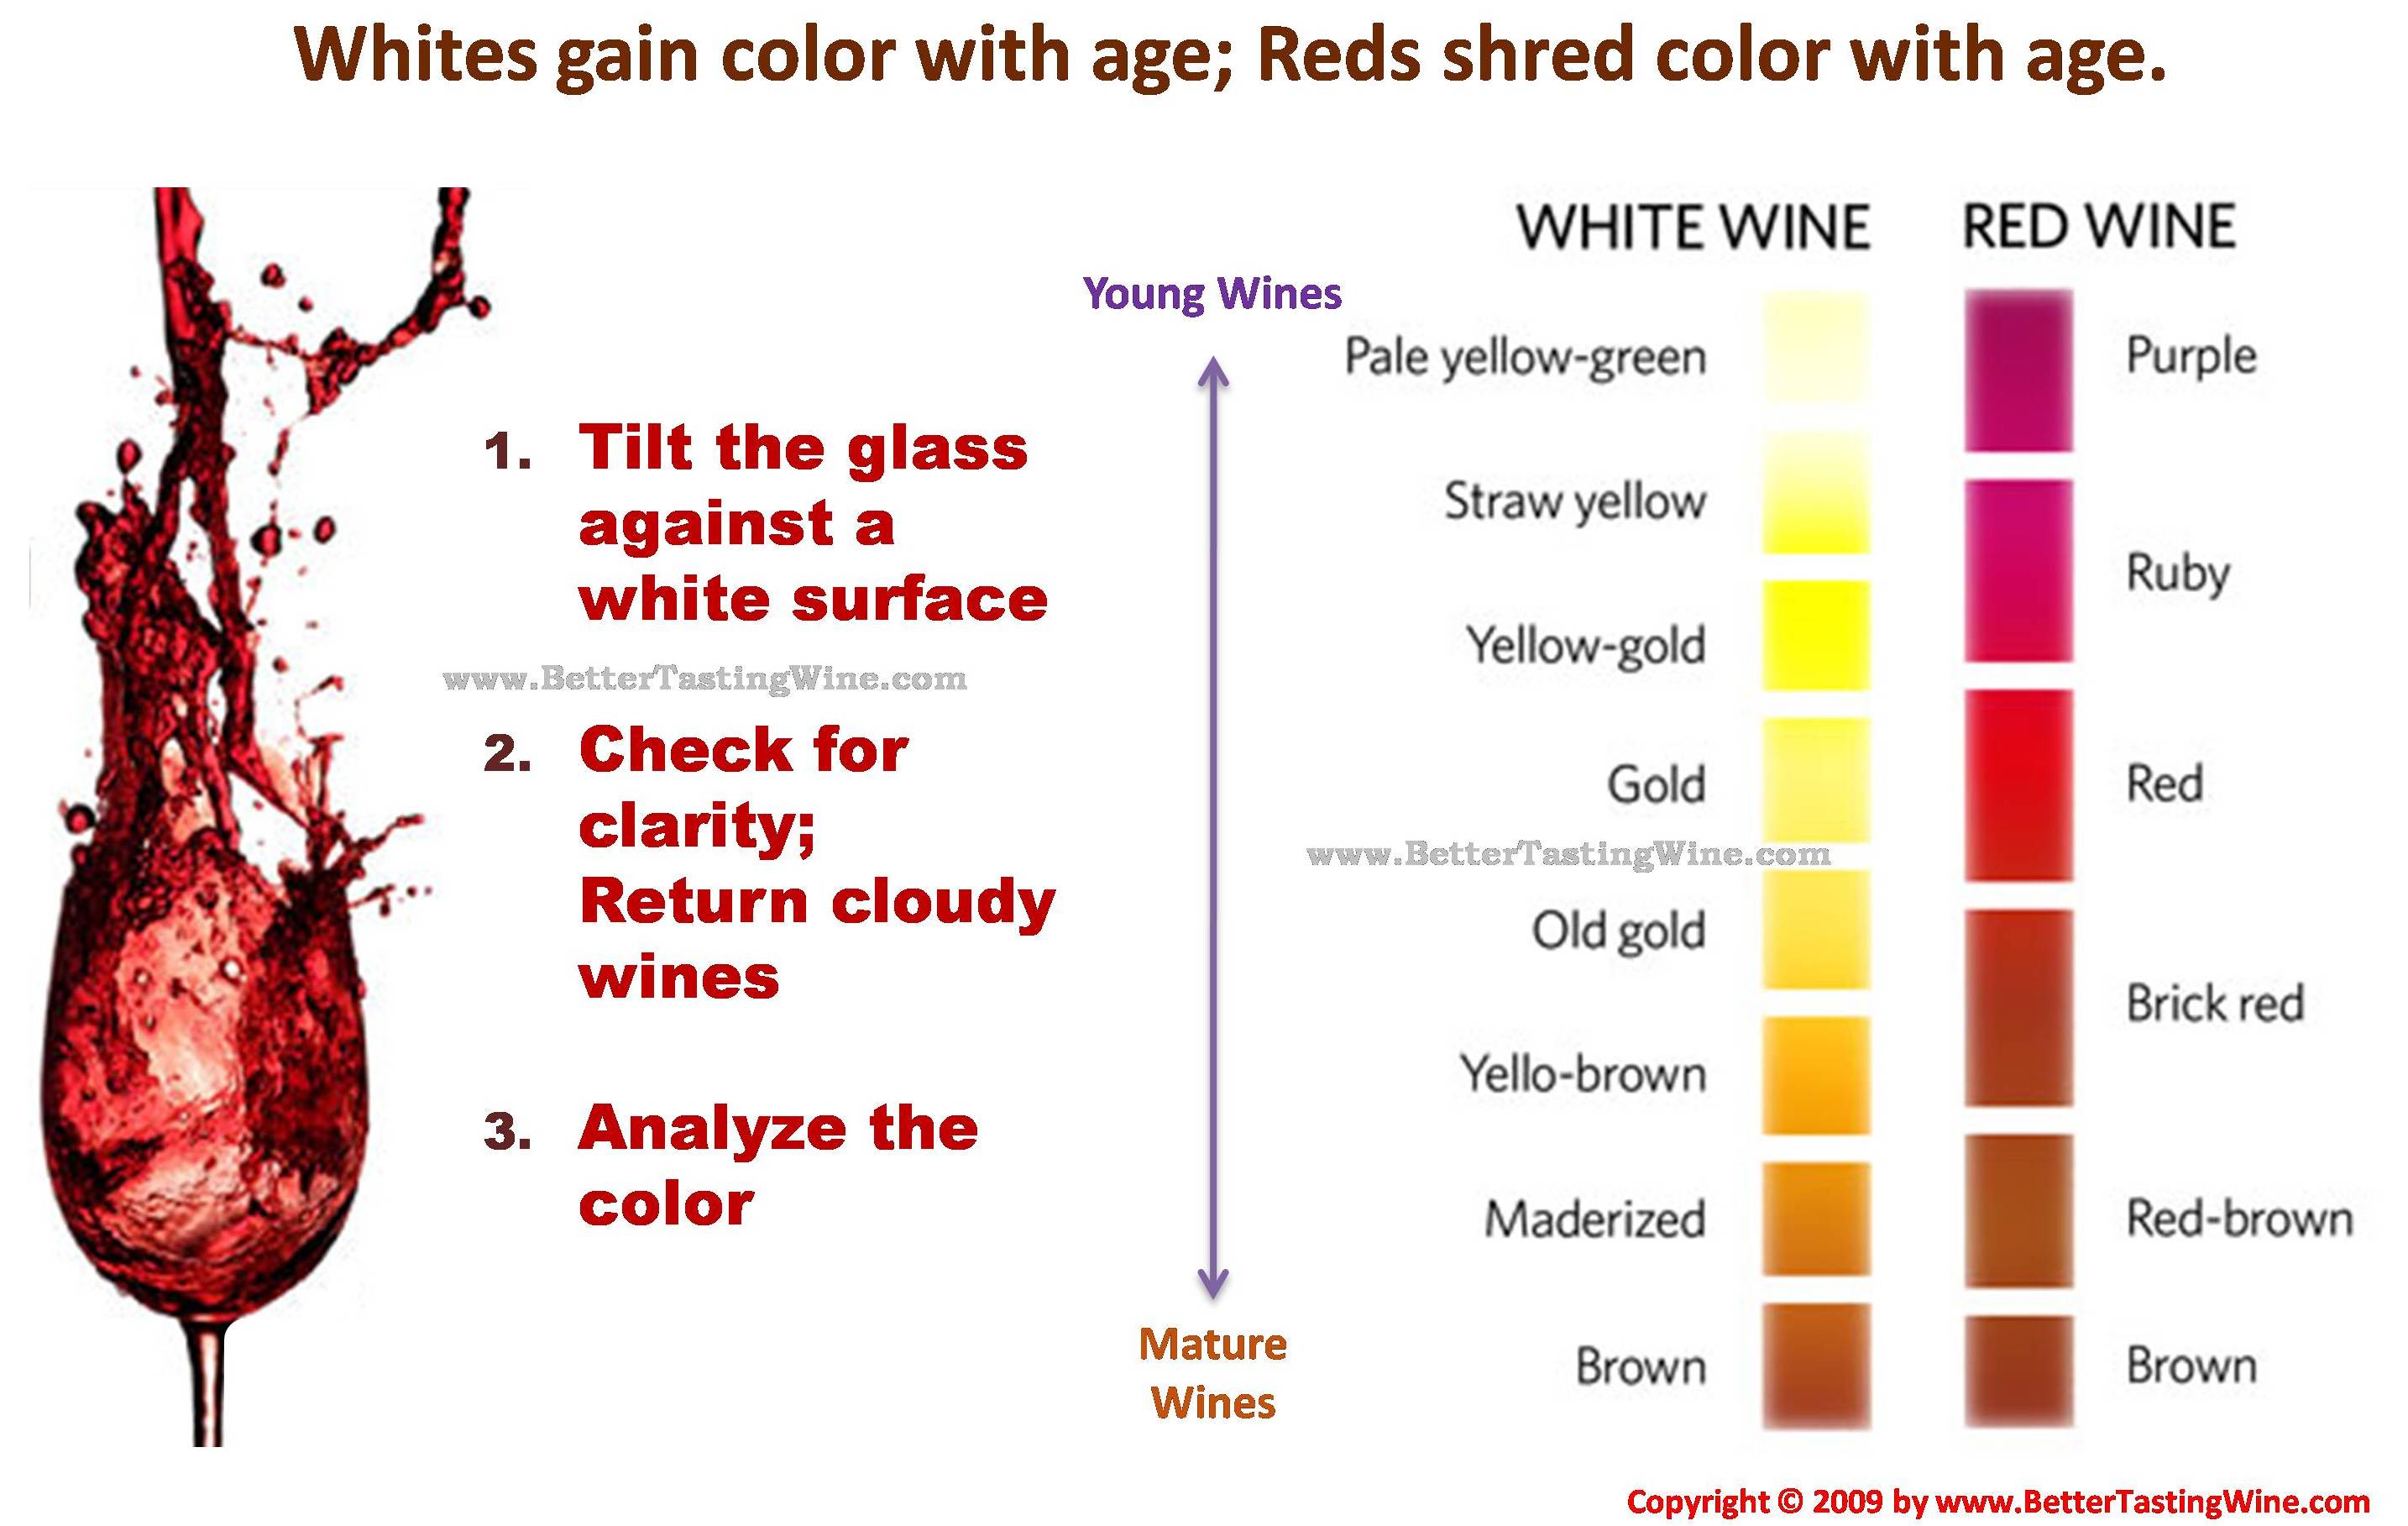 wine color with age